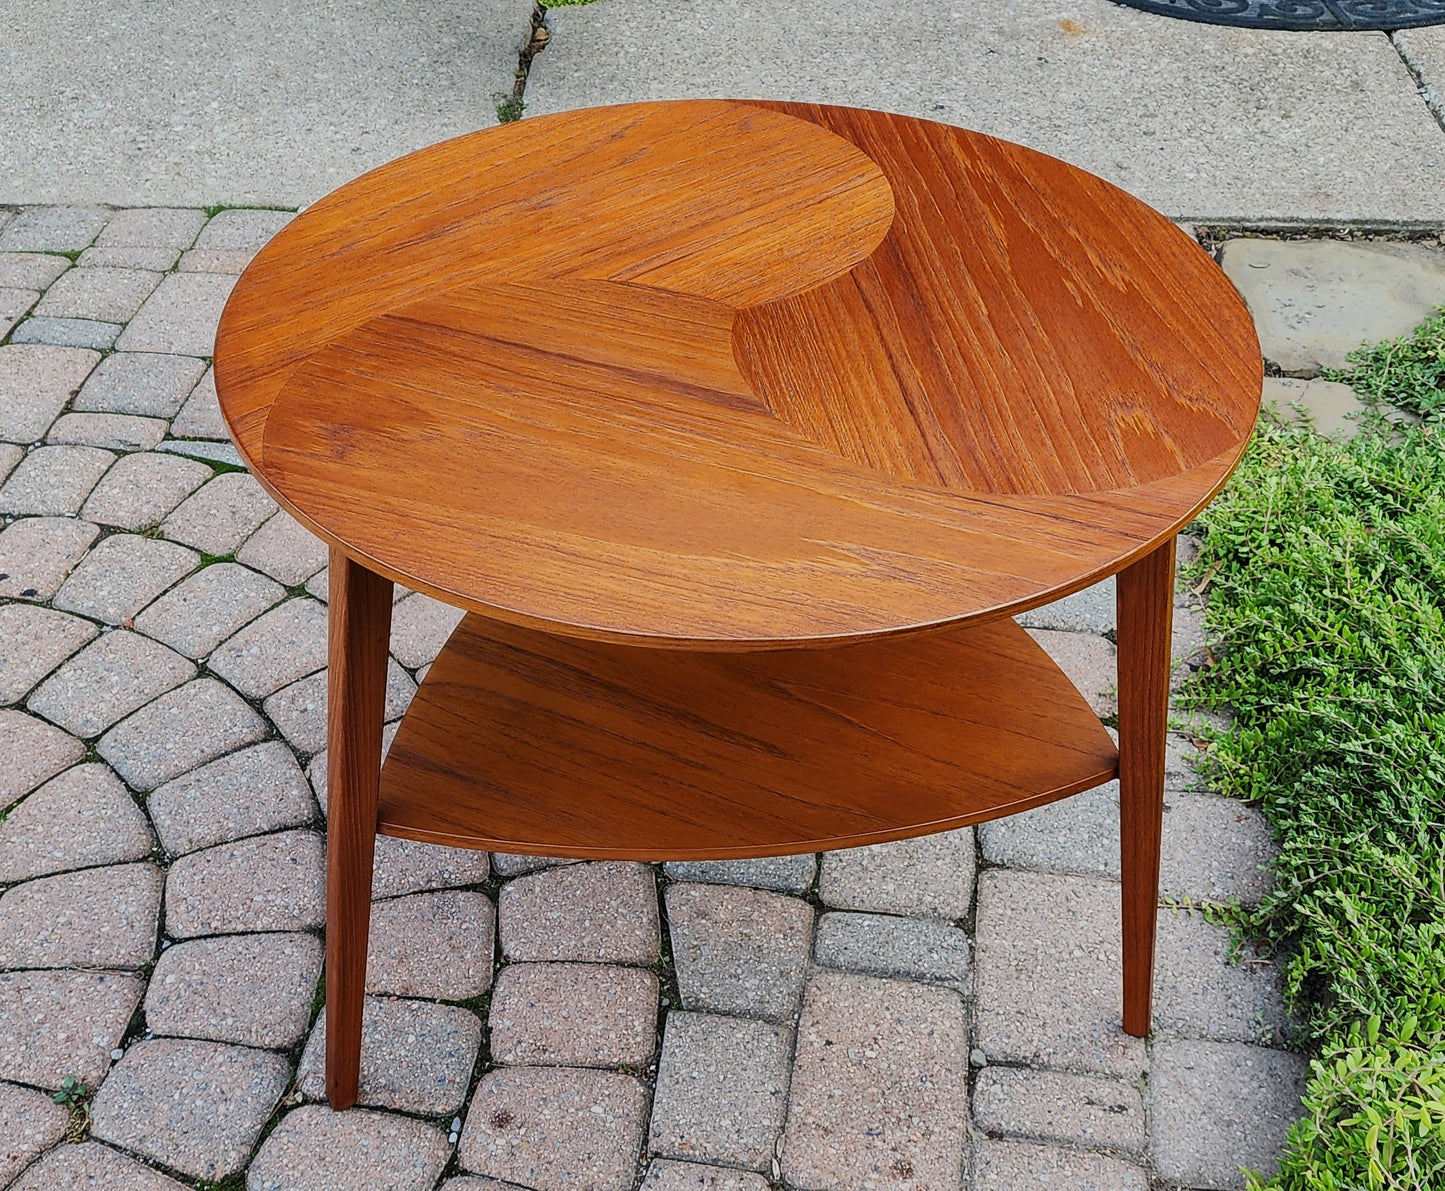 REFINISHED Danish Mid Century Modern Teak Accent Table by H. G. Jensen for Kubus